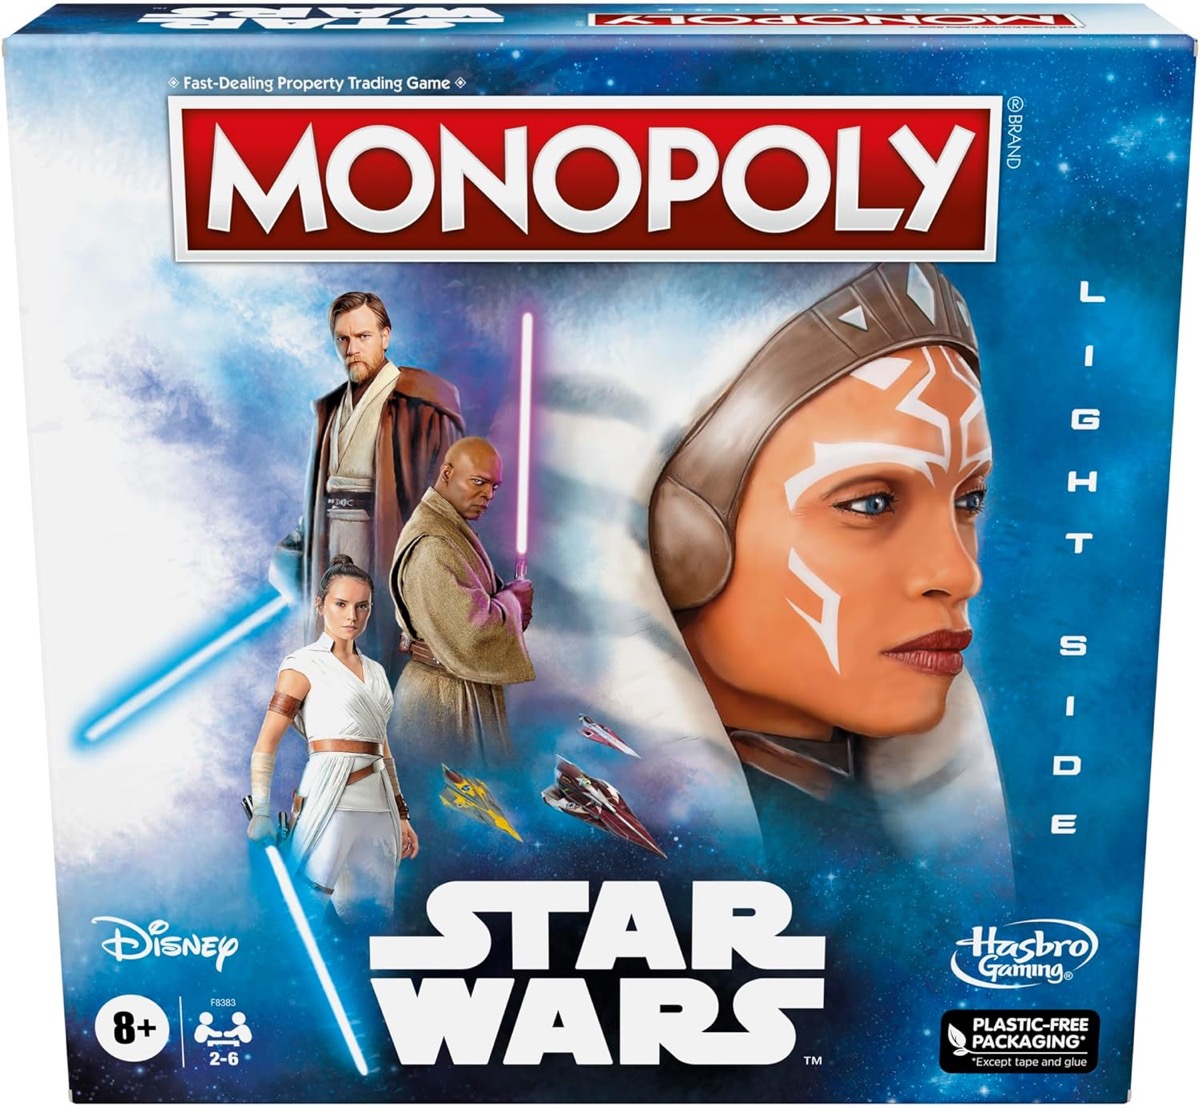 Box art for Monopoly- Star Wars Light Side Edition featuring Star Wars heroes 